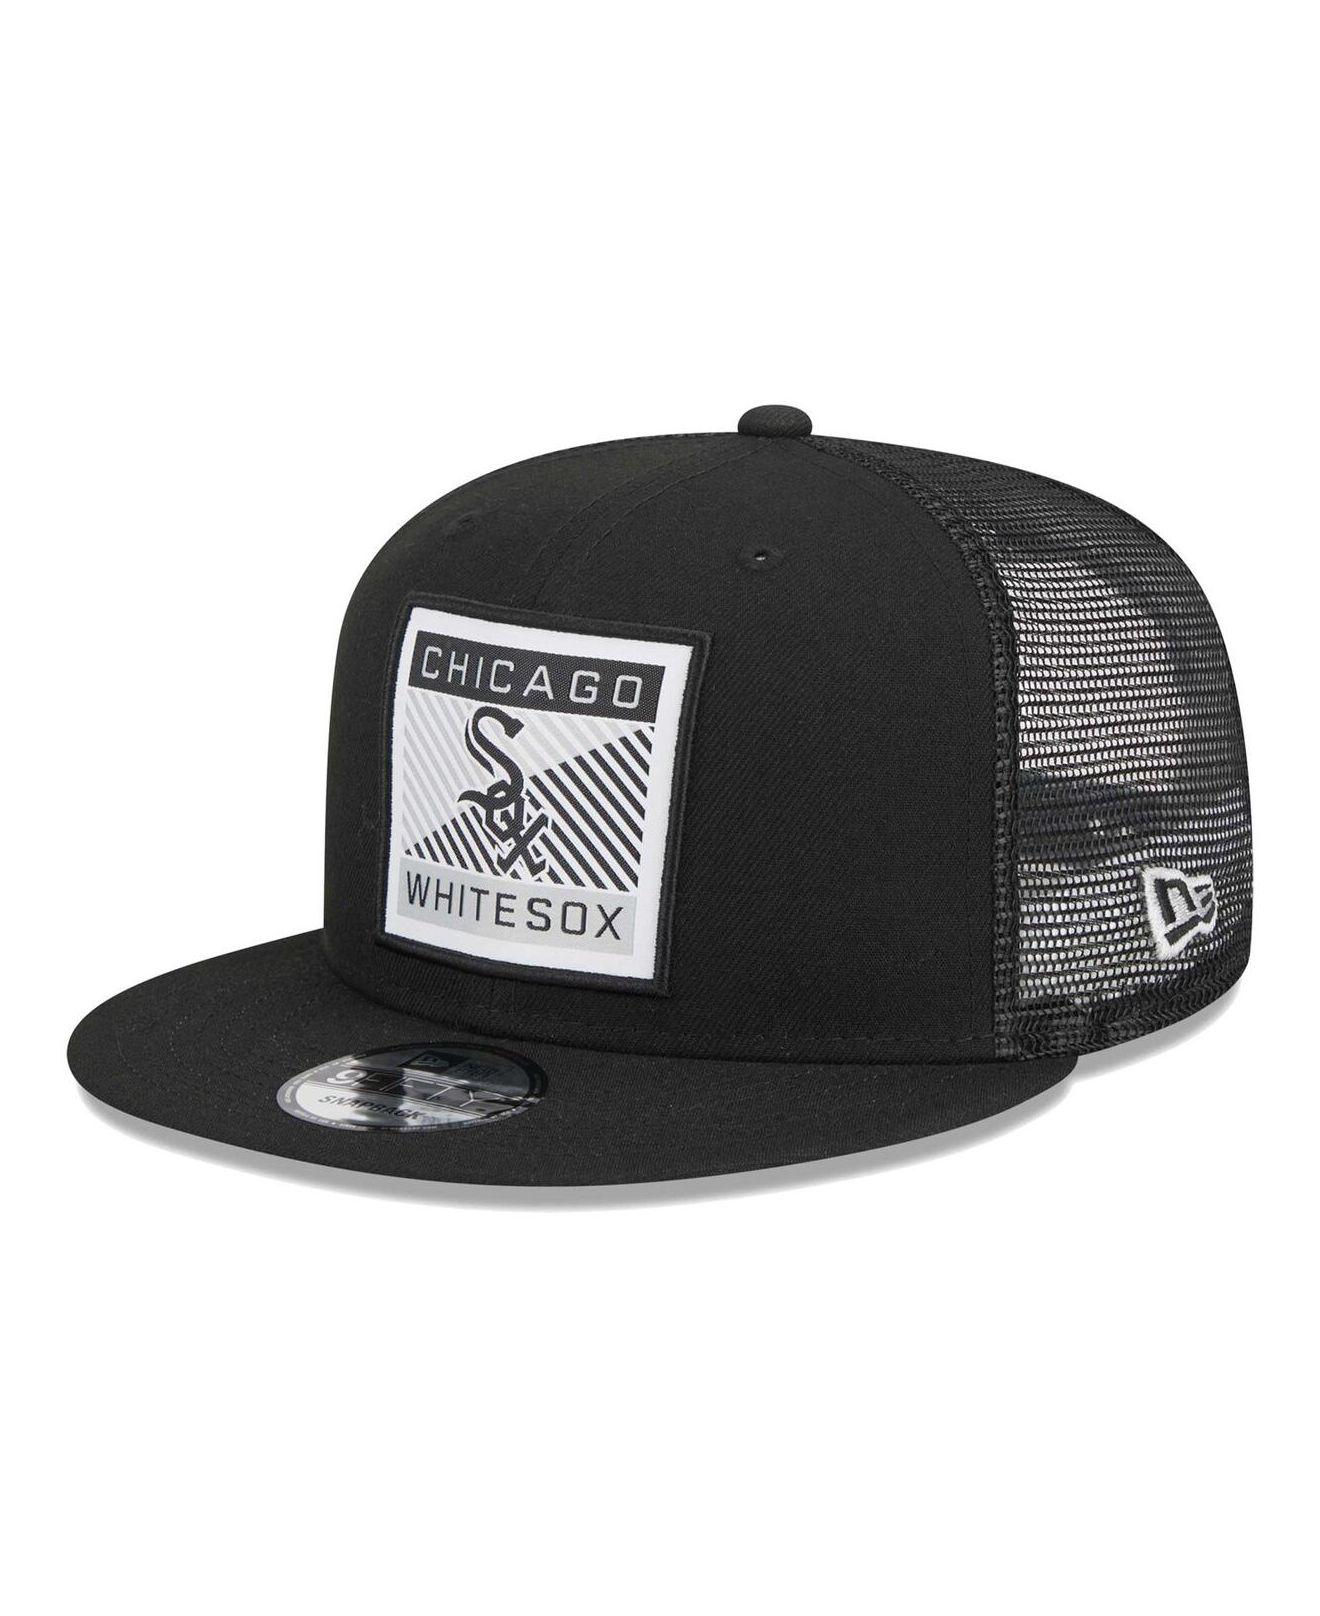 Chicago White Sox New Era City Connect 9FIFTY Adjustable Snapback Cap